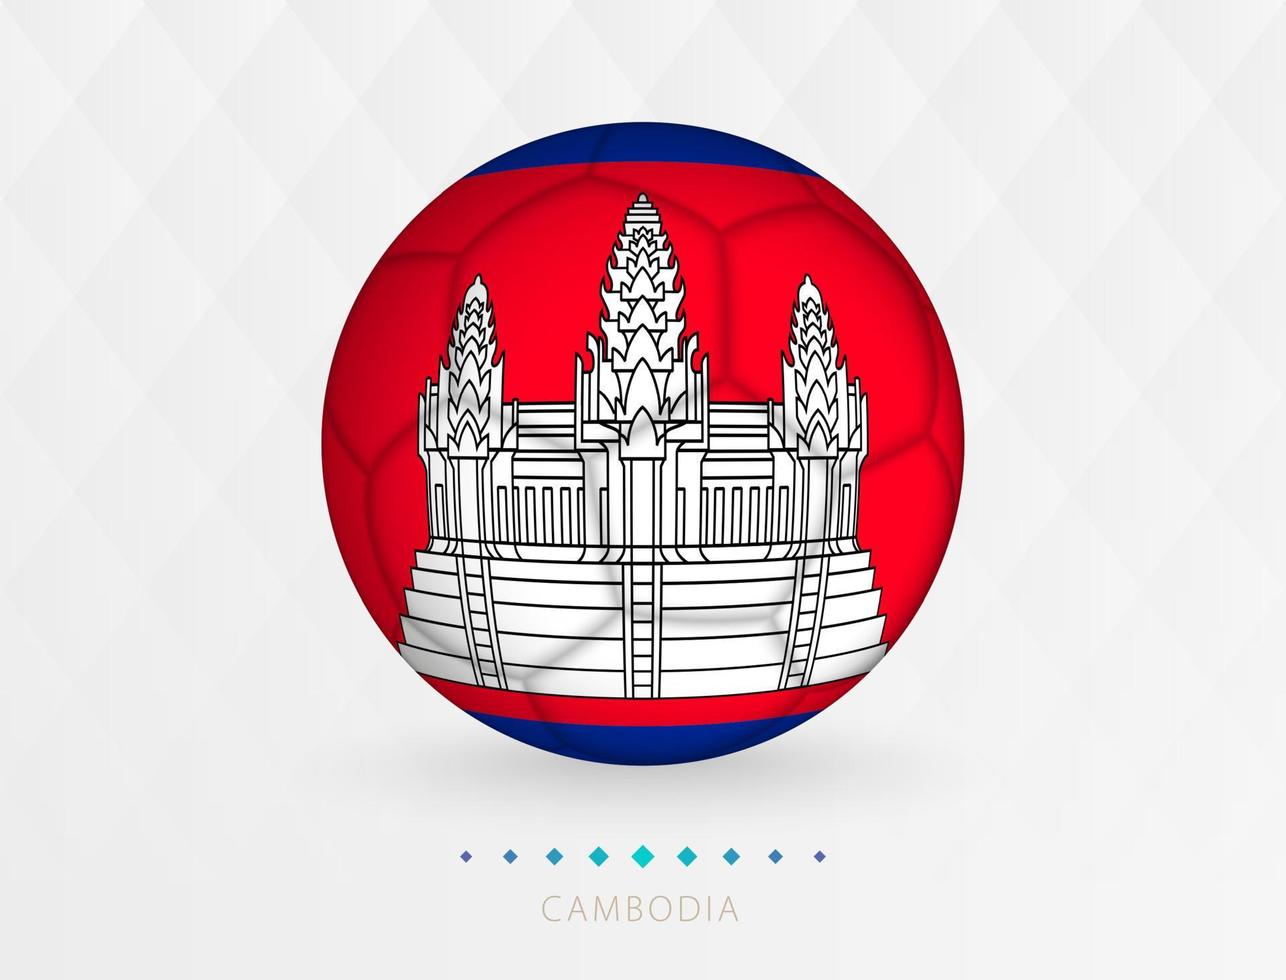 Football ball with Cambodia flag pattern, soccer ball with flag of Cambodia national team. vector